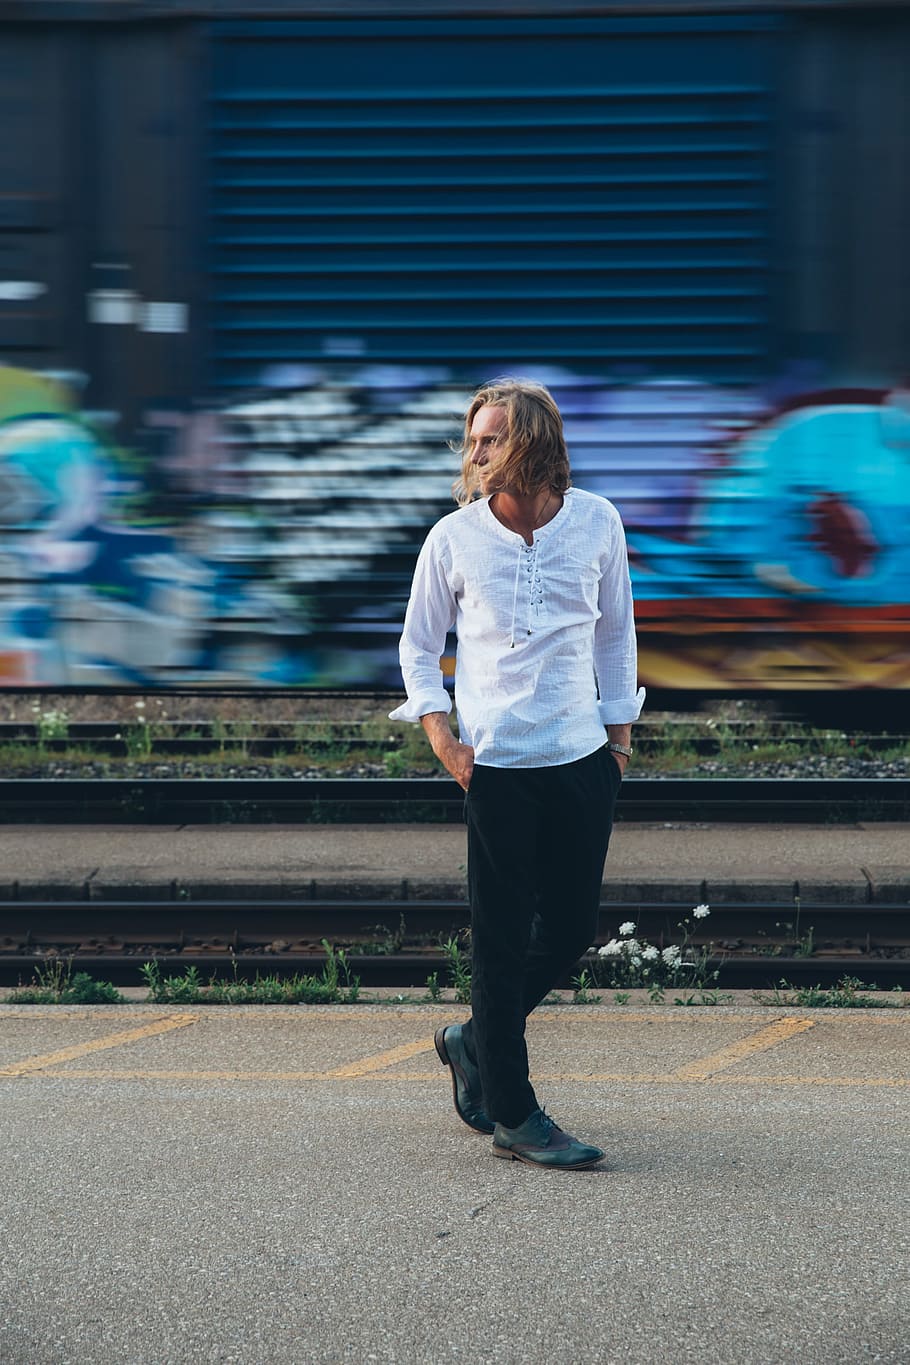 A fashionable man walks by train tracks with graffiti in the background, HD wallpaper